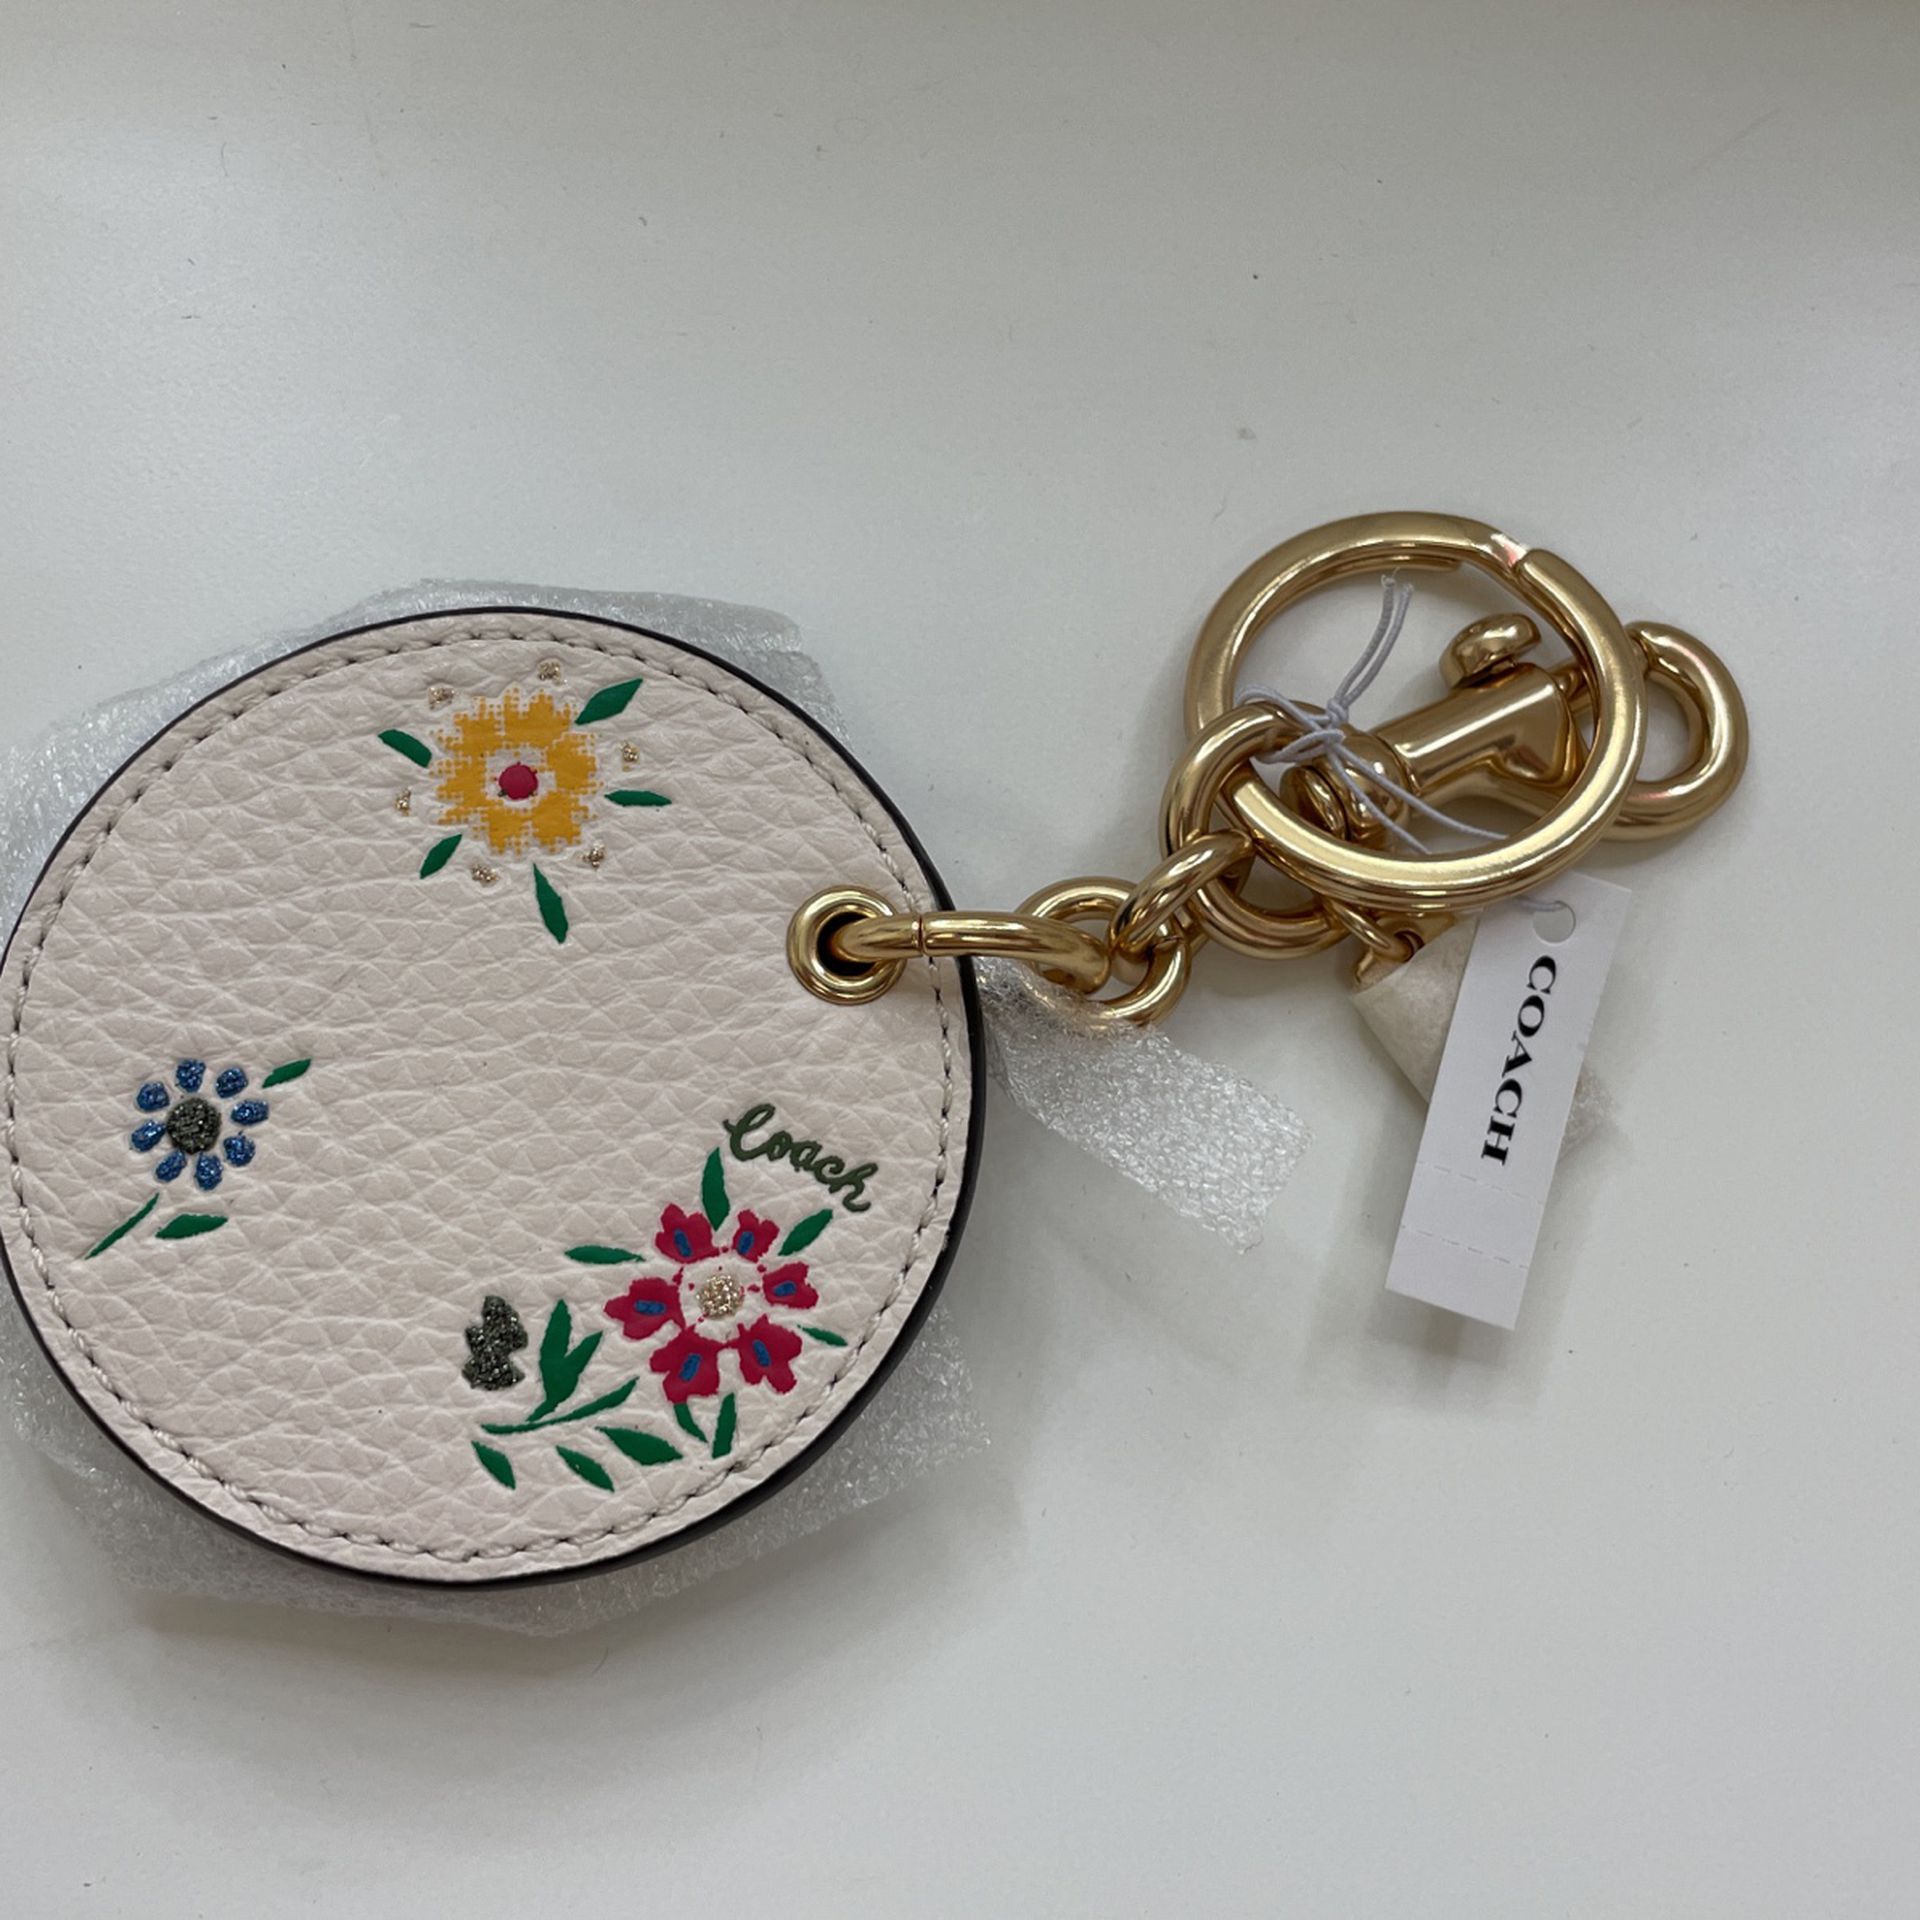 Coach Mirror Keychain for Sale in Arrowhed Farm, CA - OfferUp